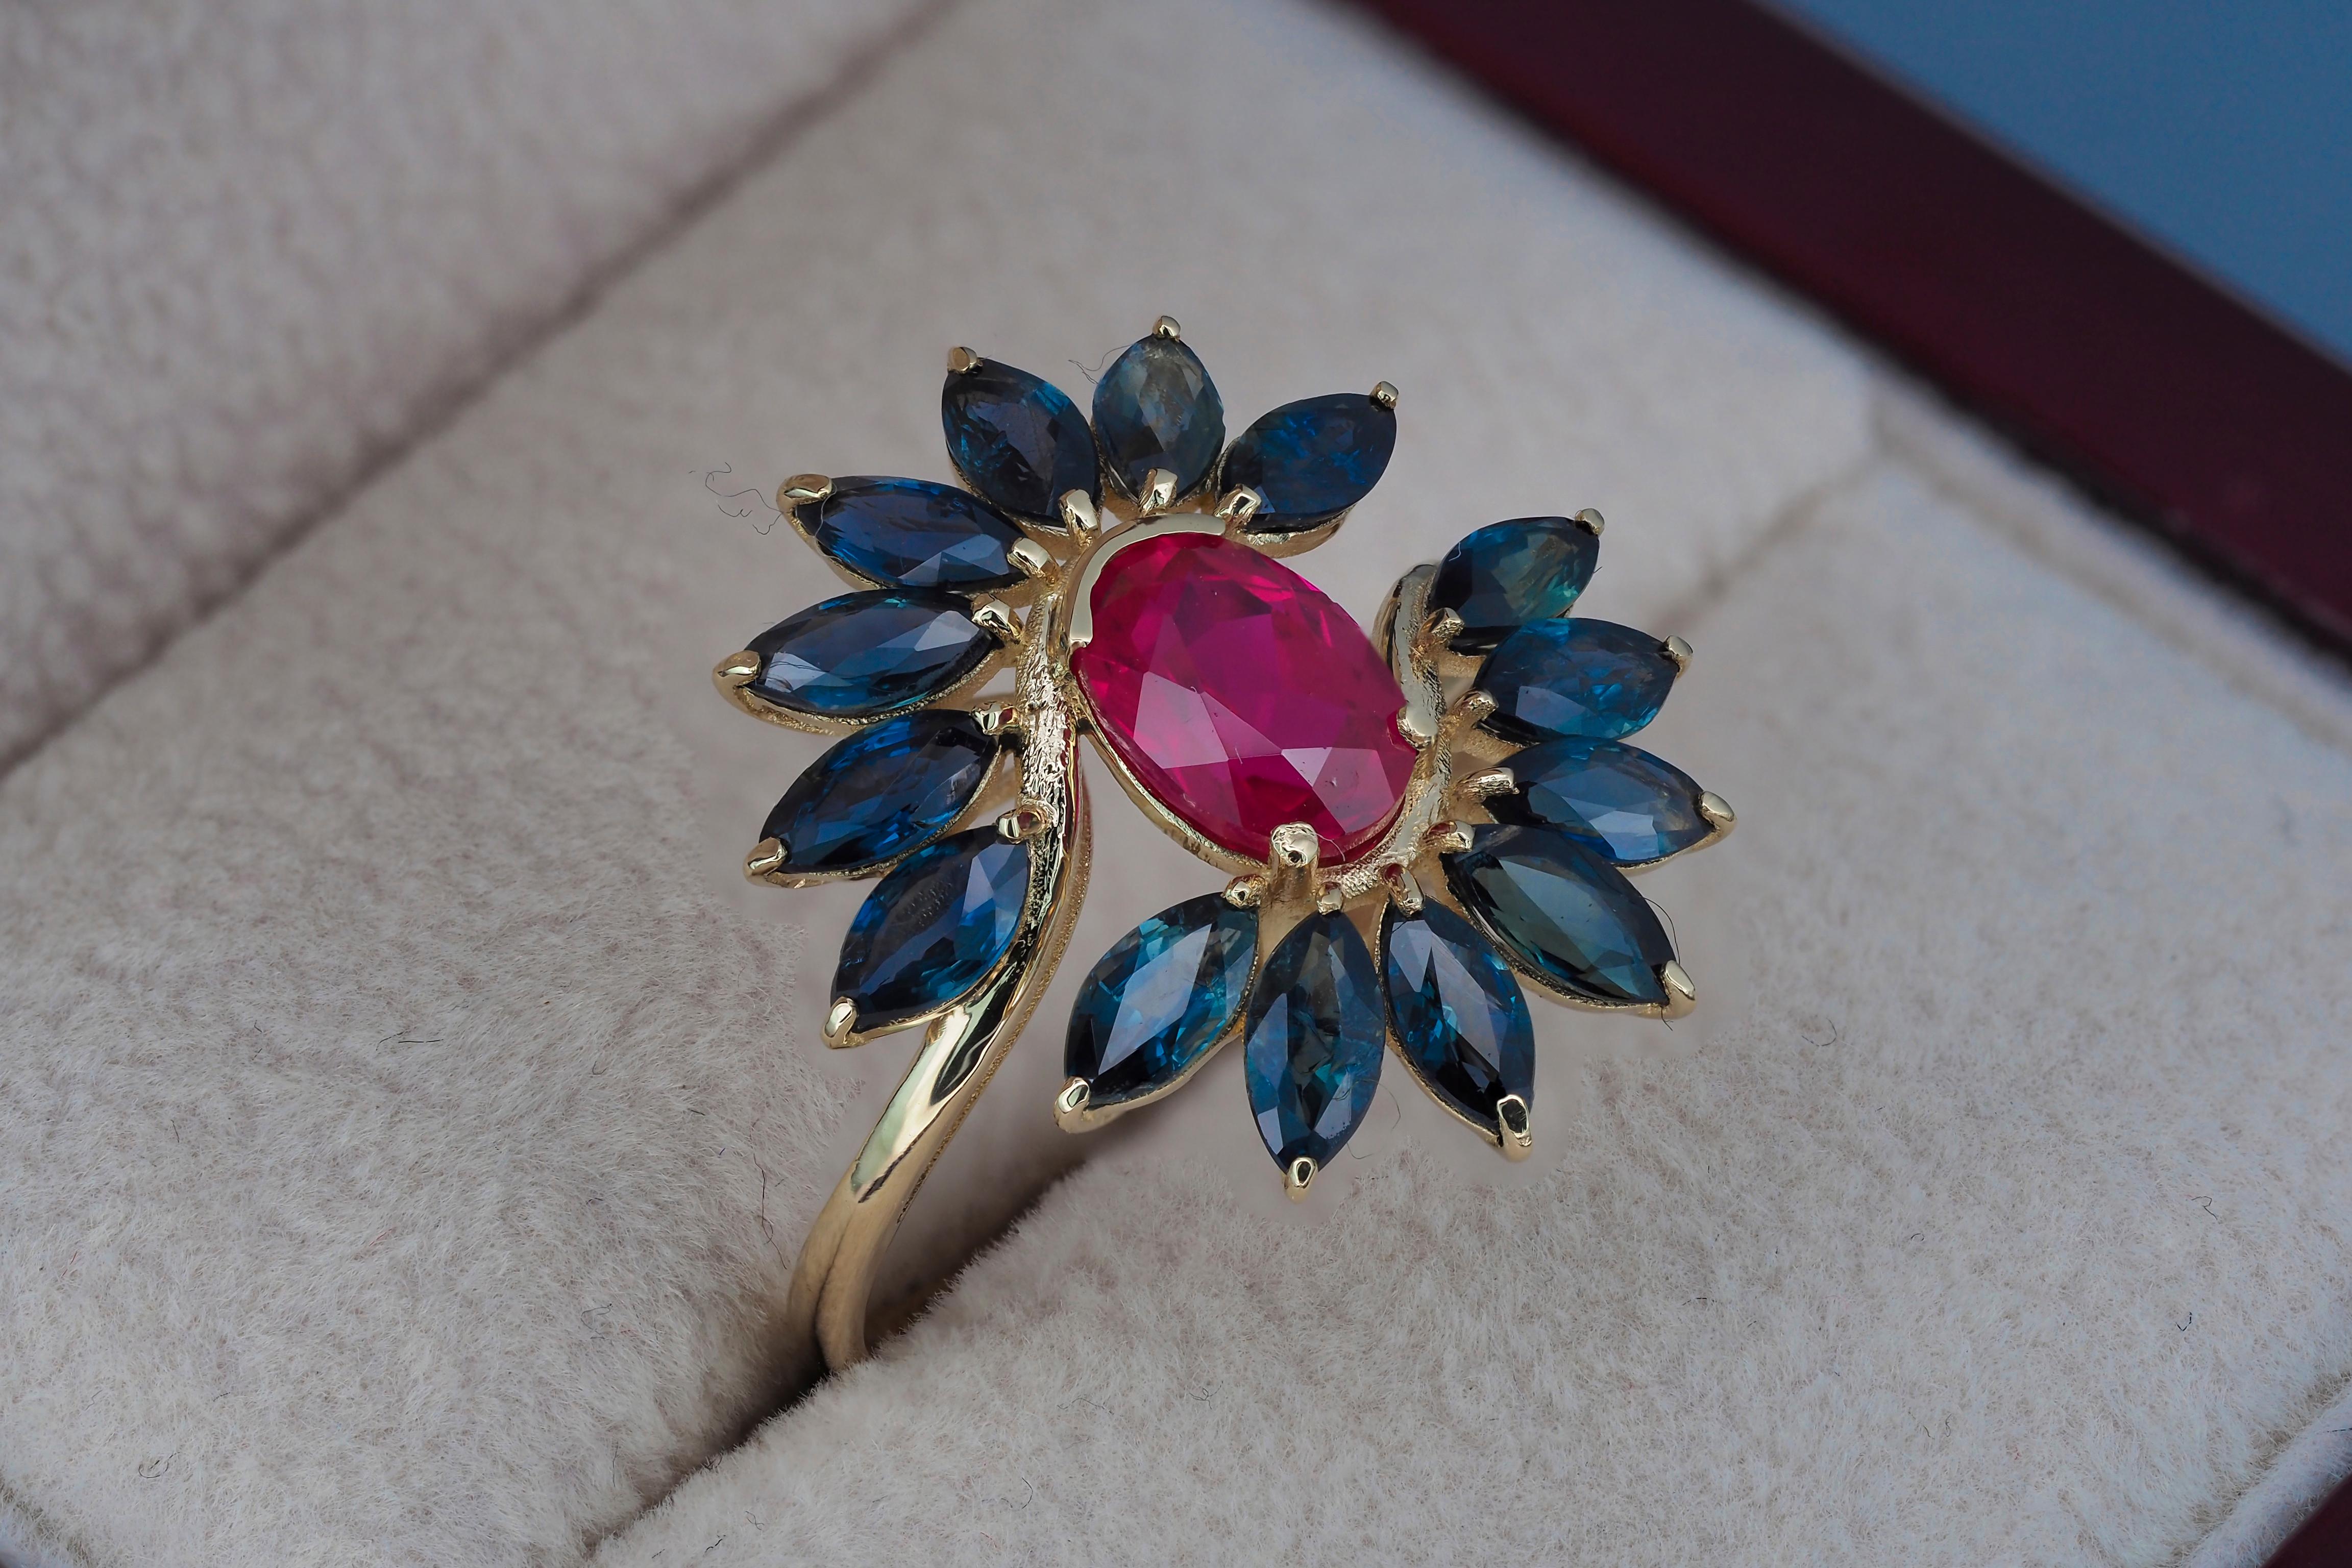 For Sale:  Ruby ring in 14k gold. Sapphire 14k gold ring. Ruby and sapphire 14k gold ring 5